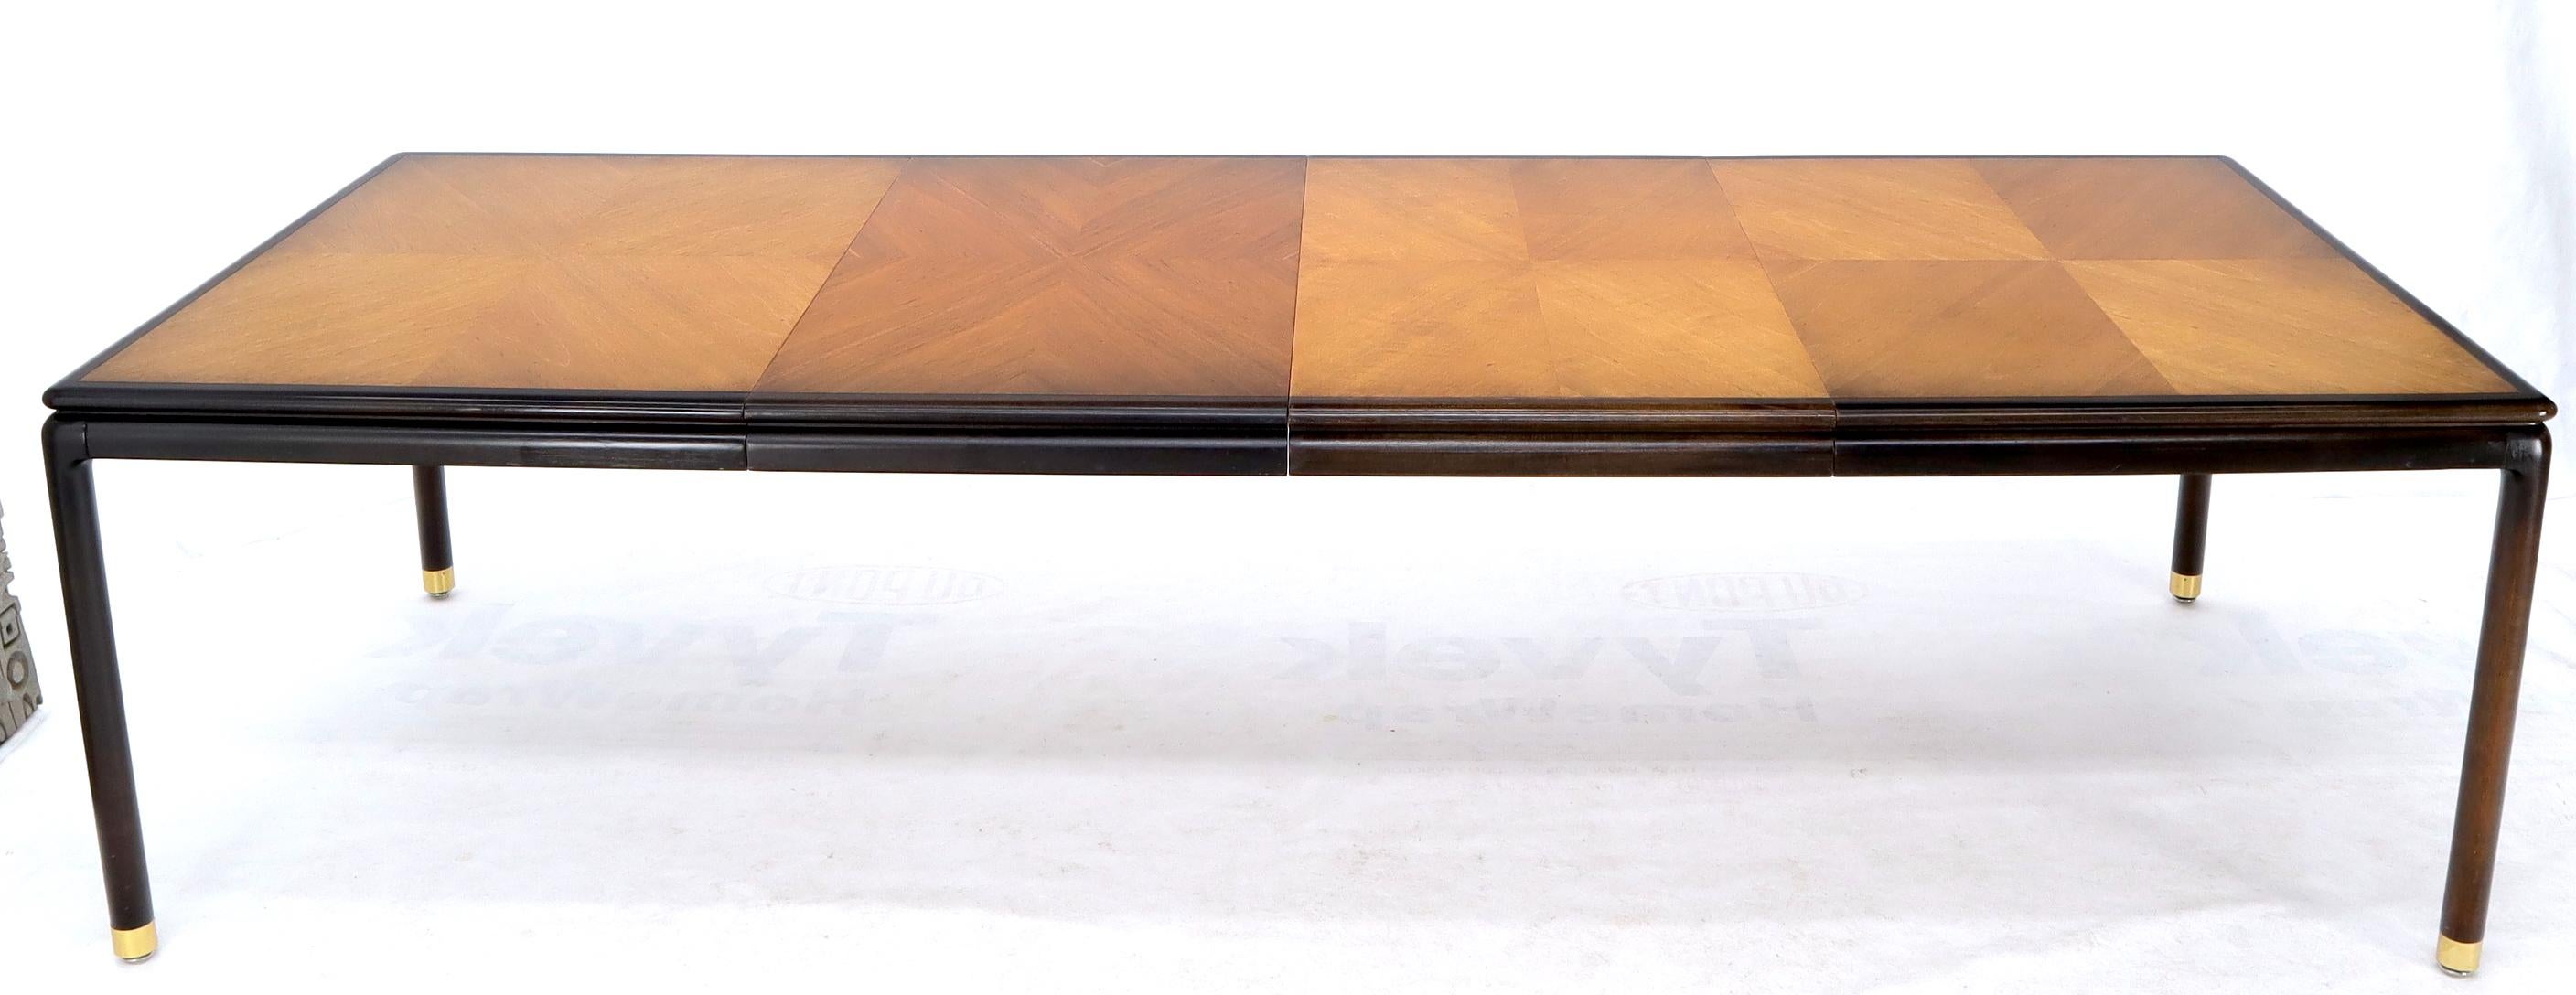 American Danish Mid-Century Modern Large Two-Tone Dining Room Table with 2 Leaves For Sale